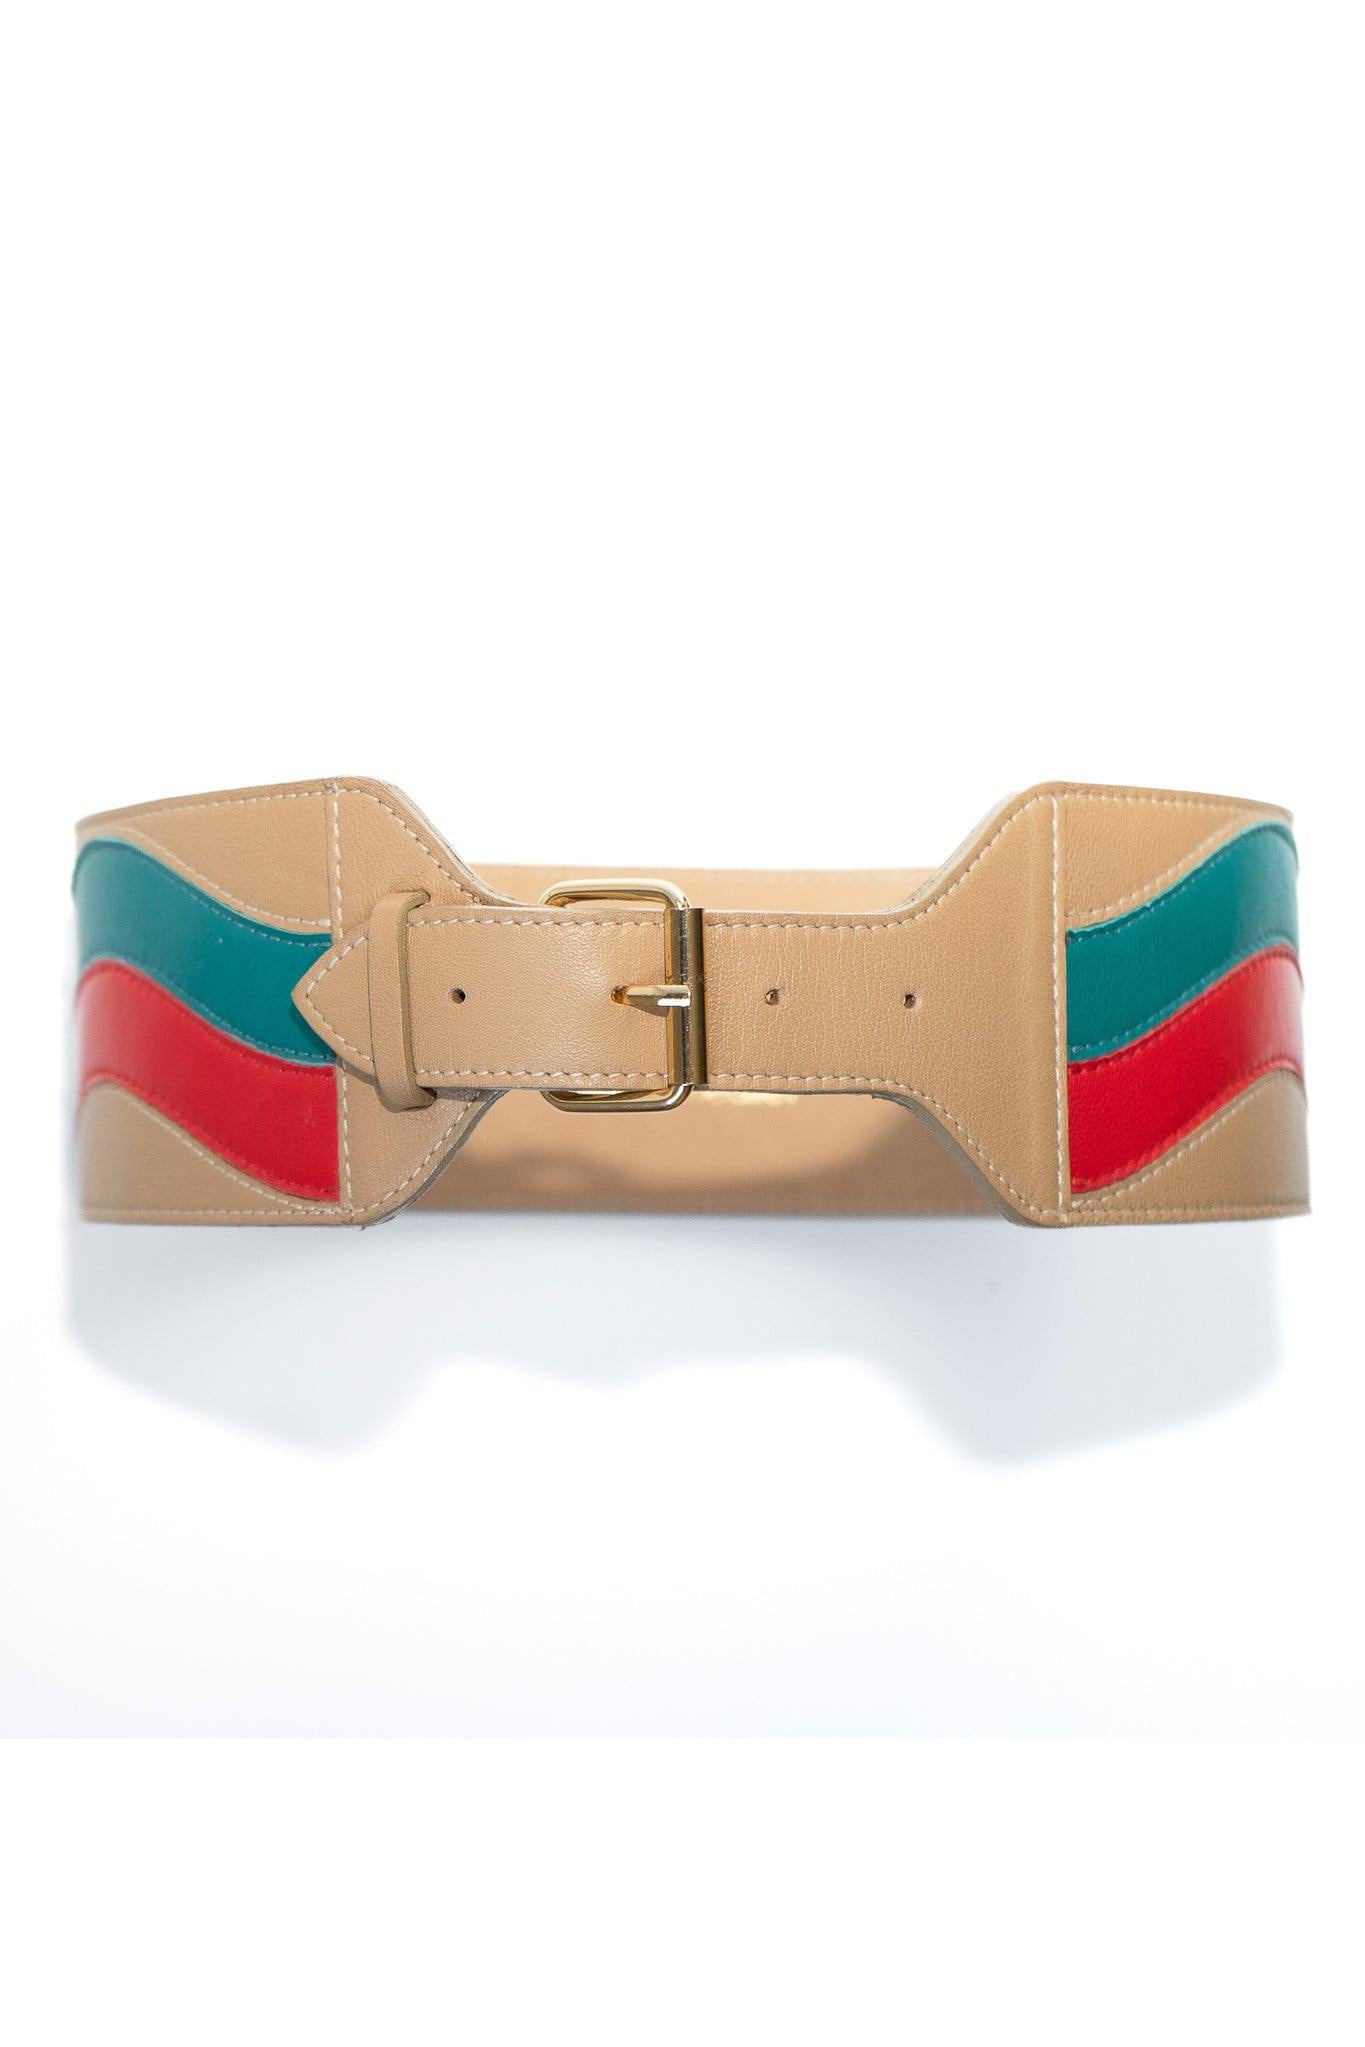 ST-WAVE BELT #2 (Sand | Red | Turquoise ) - Room 502